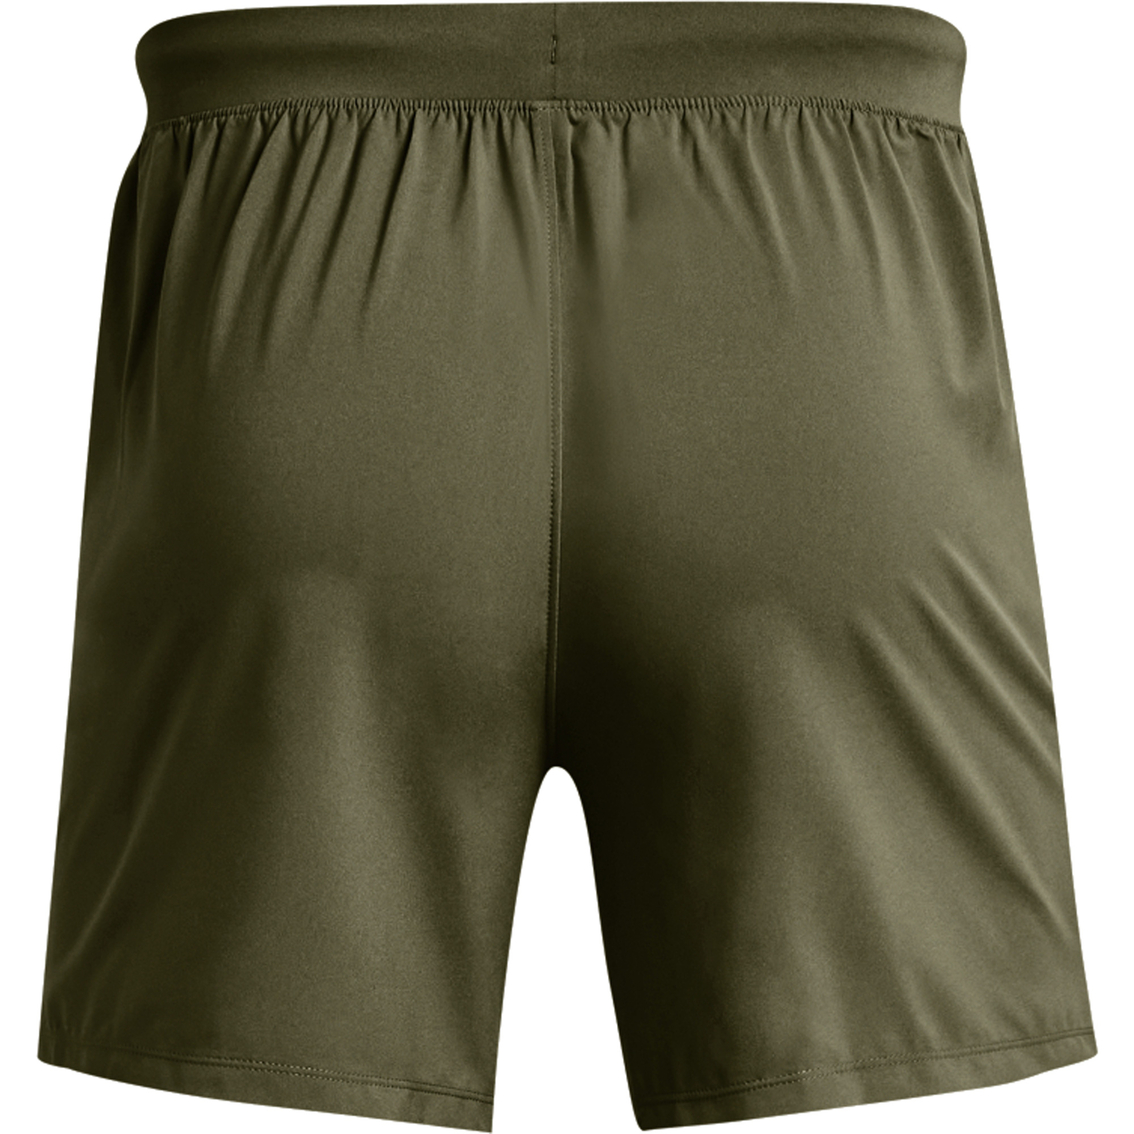 Under Armour Tac Academy 5 Shorts - Image 6 of 7